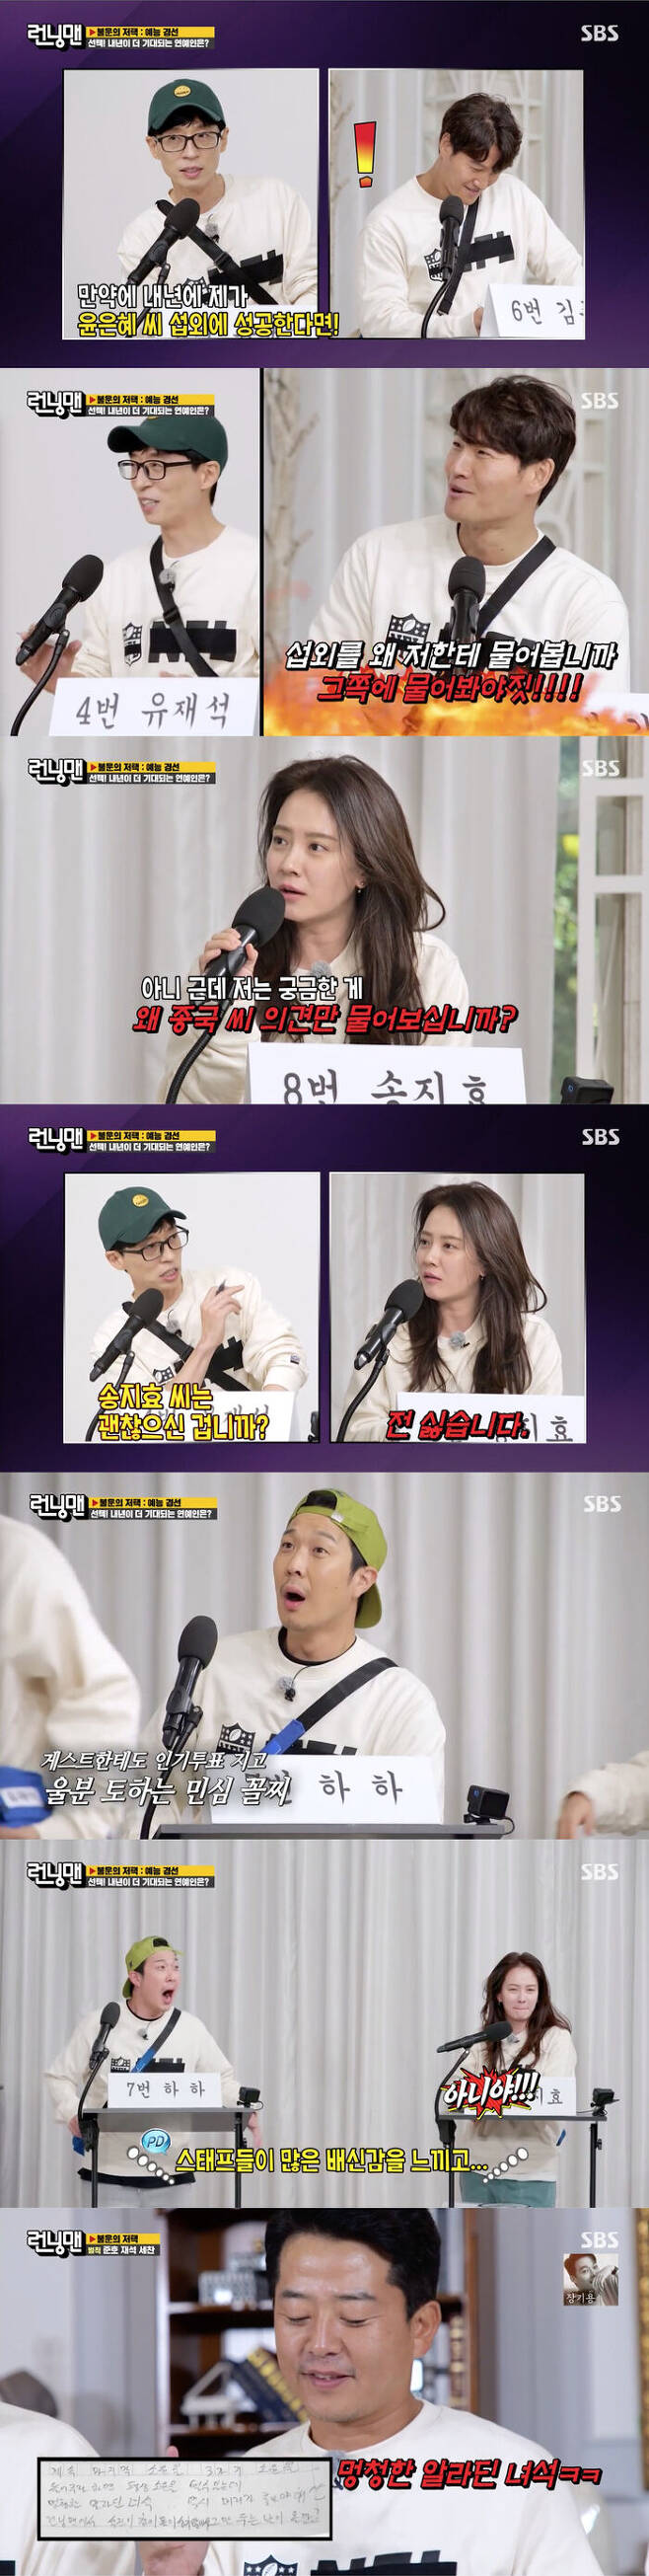 Song Ji-hyo opposed Yoon Eun-hyes appearance as a Running Man.On SBS Running Man broadcasted on the 31st, Kim Jun-ho, the icon of Bad Luck, and the Bad Luck mansion race were conducted.If Kim Jun-ho is in the fourth pRace, only one person who Kim Jun-ho points for will be punished. If Kim Jun-ho does not get within the fourth pRace, all members who are lower than Kim Jun-ho were punished.The final ranking was determined by the Chocolate obtained from each mission, and it was possible to be called Chocolate through middle betting.One of the missions was the celebrity race, which is expected next year. In this mission, where the rankings are determined through the votes of the Staff, each member appealed to him in various ways.Yoo Jae-Suk, who made a Commitment to Yoon Eun-hye in all his remarks, asked Kim Jong-guk what would happen if Yoon Eun-hye succeeded in his remarks.Kim Jong Kook said, When I take the initiative and ask questions, I ask my opponents Commitment, but why do you put me in your Commitment?Yoo Jae-Suk did not bow down and asked Kim Jong-guk if he could get Yoon Eun-hye. Then Kim Jong-guk shouted, Why do you ask me about the party?At this time, Song Ji-hyo asked why Kim Jong-kooks opinion was asked. He said, Why do not you ask my opinion?So Kim Jong-guk praised Song Ji-hyo for doing great.Yoo Jae-Suk expressed regret, saying, There is opposition from the team. However, he said, But if you object like this, your interest is going to increase.I have to consider various situations, but I will do my best. Ji Suk-jin One the first pRace in the race despite Yoo Jae-Suks Commitment, and Ji Suk-jin, who showed off his singing ability with a soft voice, poured the most votes.I am sorry that I can not recognize my face sometimes. Yang Se-chan took the second pRace and Yoo Jae-Suk took the third pRace. So Yang Se-chan also showed Kim Jong-guks personal performance.And Yoo Jae-Suk promised Yoon Eun-hye once again, saying, Please expect me next year.Kim One seventh pRace in the race, but she surprised everyone by getting a surprise result of being second in the betting because she was called to Chocolate quite a lot.Haha was the lowest in the race, which was ranked by the election of the Staff. Yang said, What do you do when you play?And Bopil PD also said, I think the Staff felt a lot of betrayal, he said.Yoo Jae-Suk said, Thank you. He gave a smile to Haha.On the other hand, after all the missions, Kim Jun-ho ranked sixth in the final ranking, and he was penalized to read fairy tale books with Yoo Jae-Suk and Yang Se-chan, who were seventh in the ranking.Kim Jun-ho wrote a book report and copied Yoo Jae-Suks book report, and asked Aladdin to listen to his last Hope for three Hopees, and he can make a lifelong Hope.